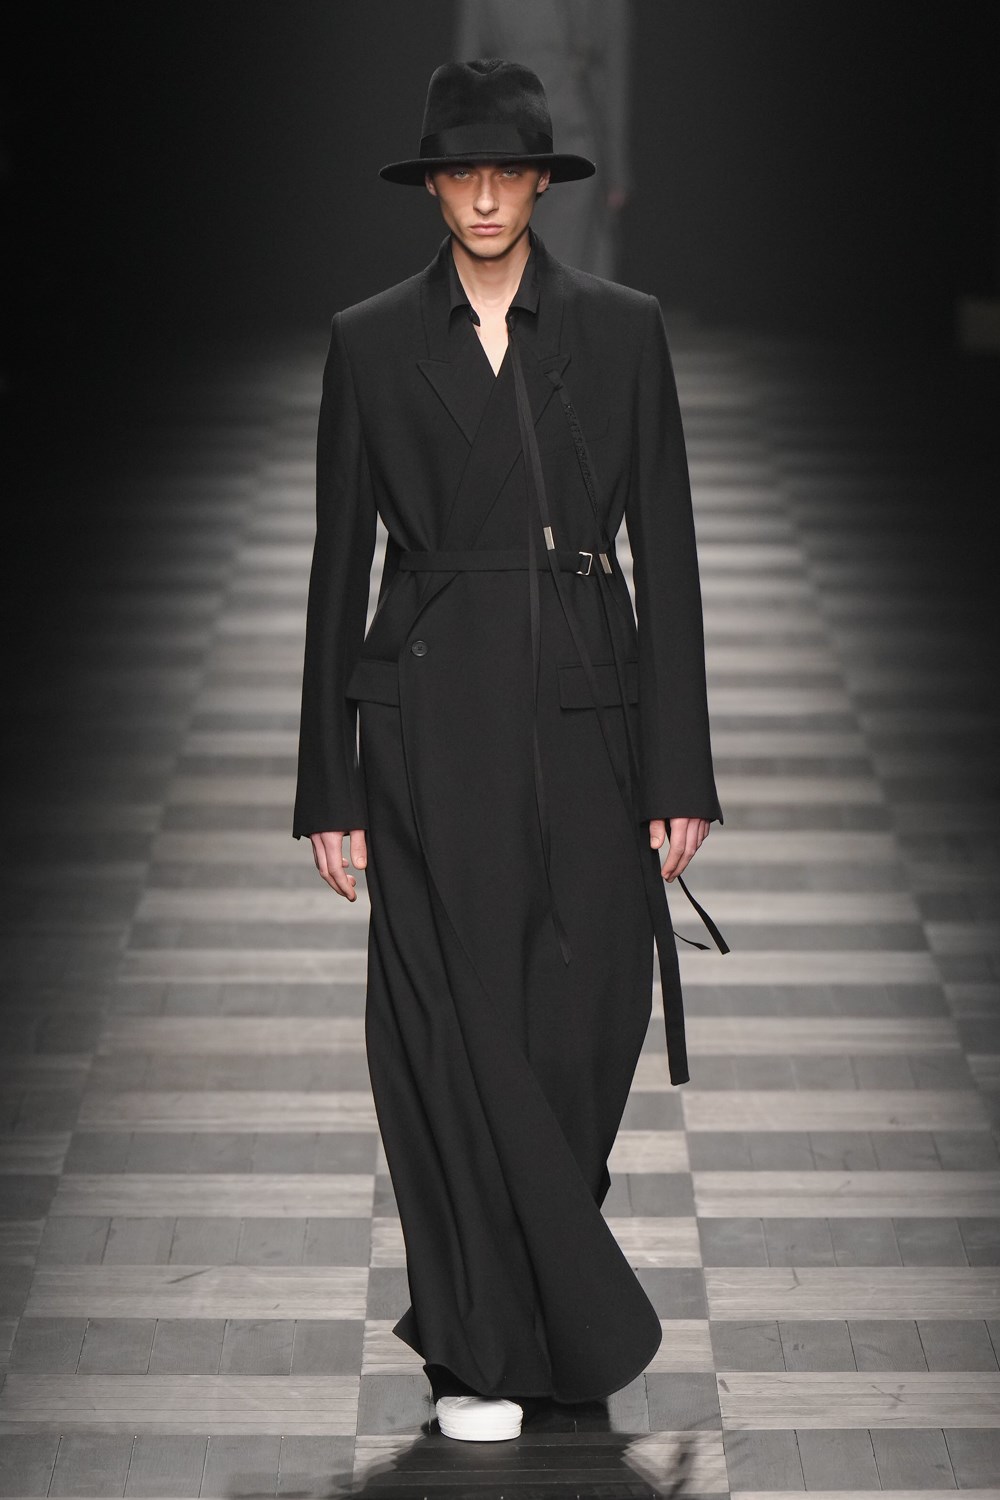 Ann Demeulemeester Fall 2022 Fashion Show | The Impression